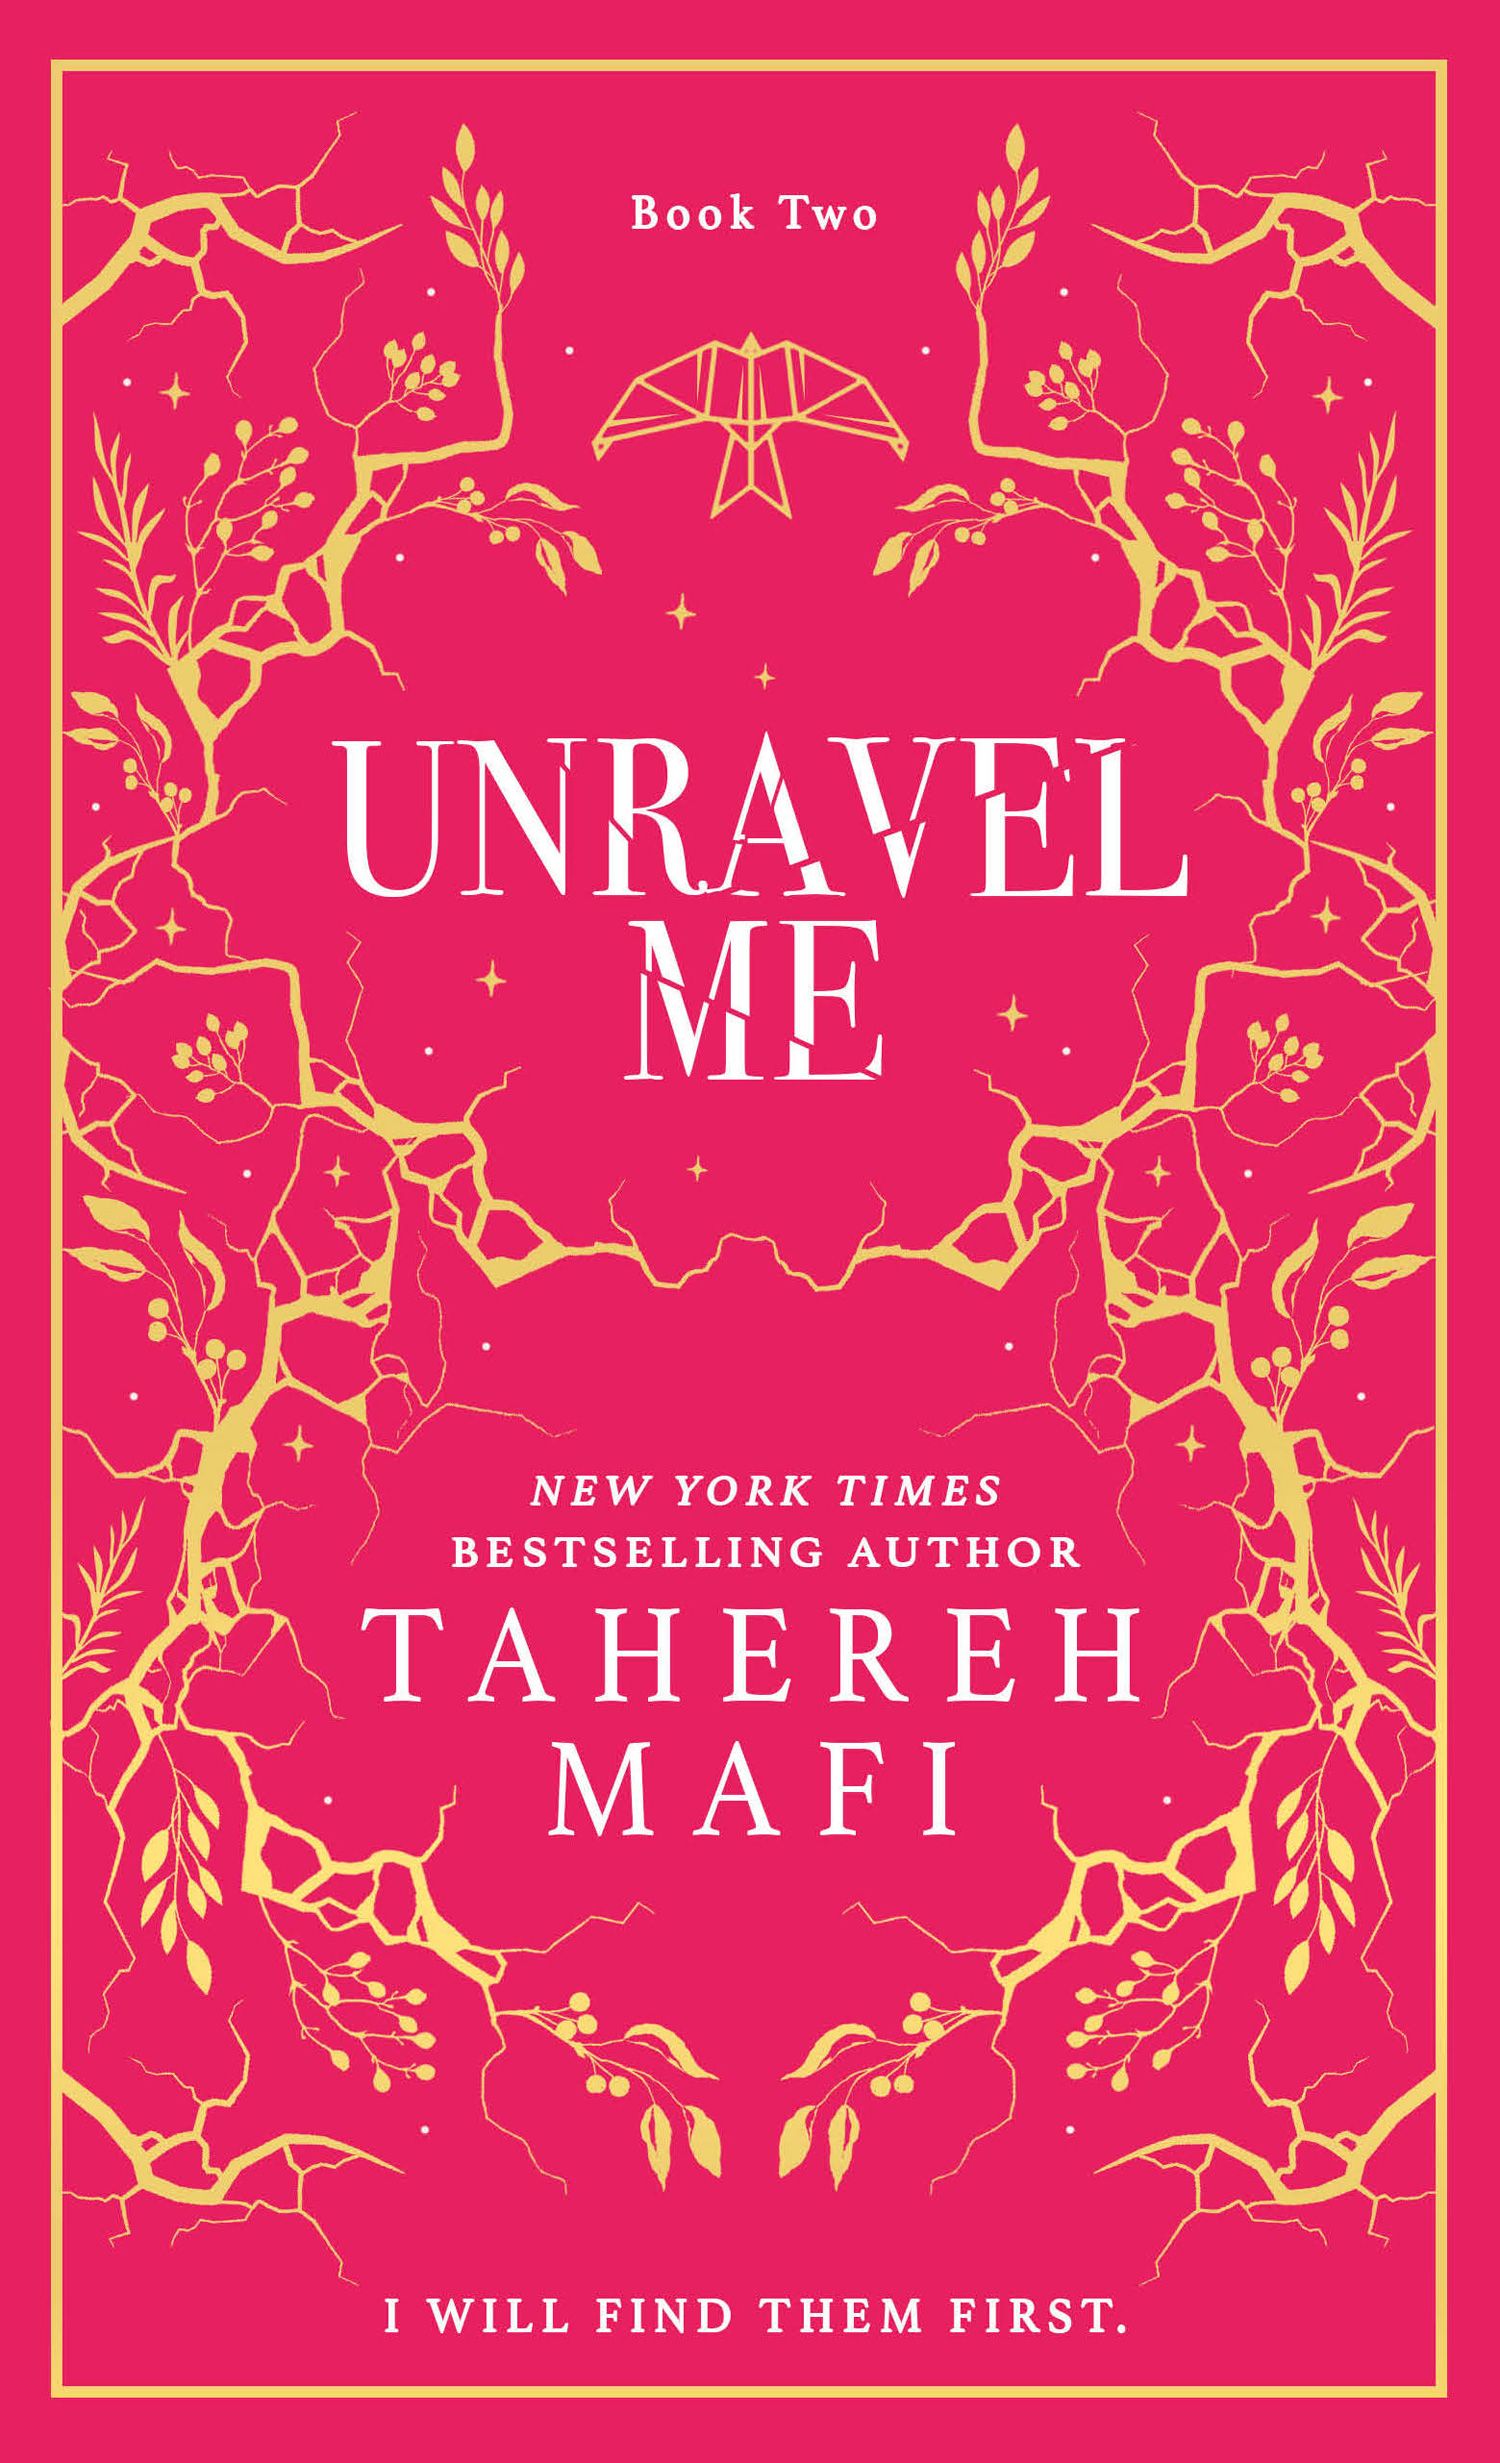 Shatter Me - Unravel Me (Shatter Me): Collectors Special edition -  HarperReach